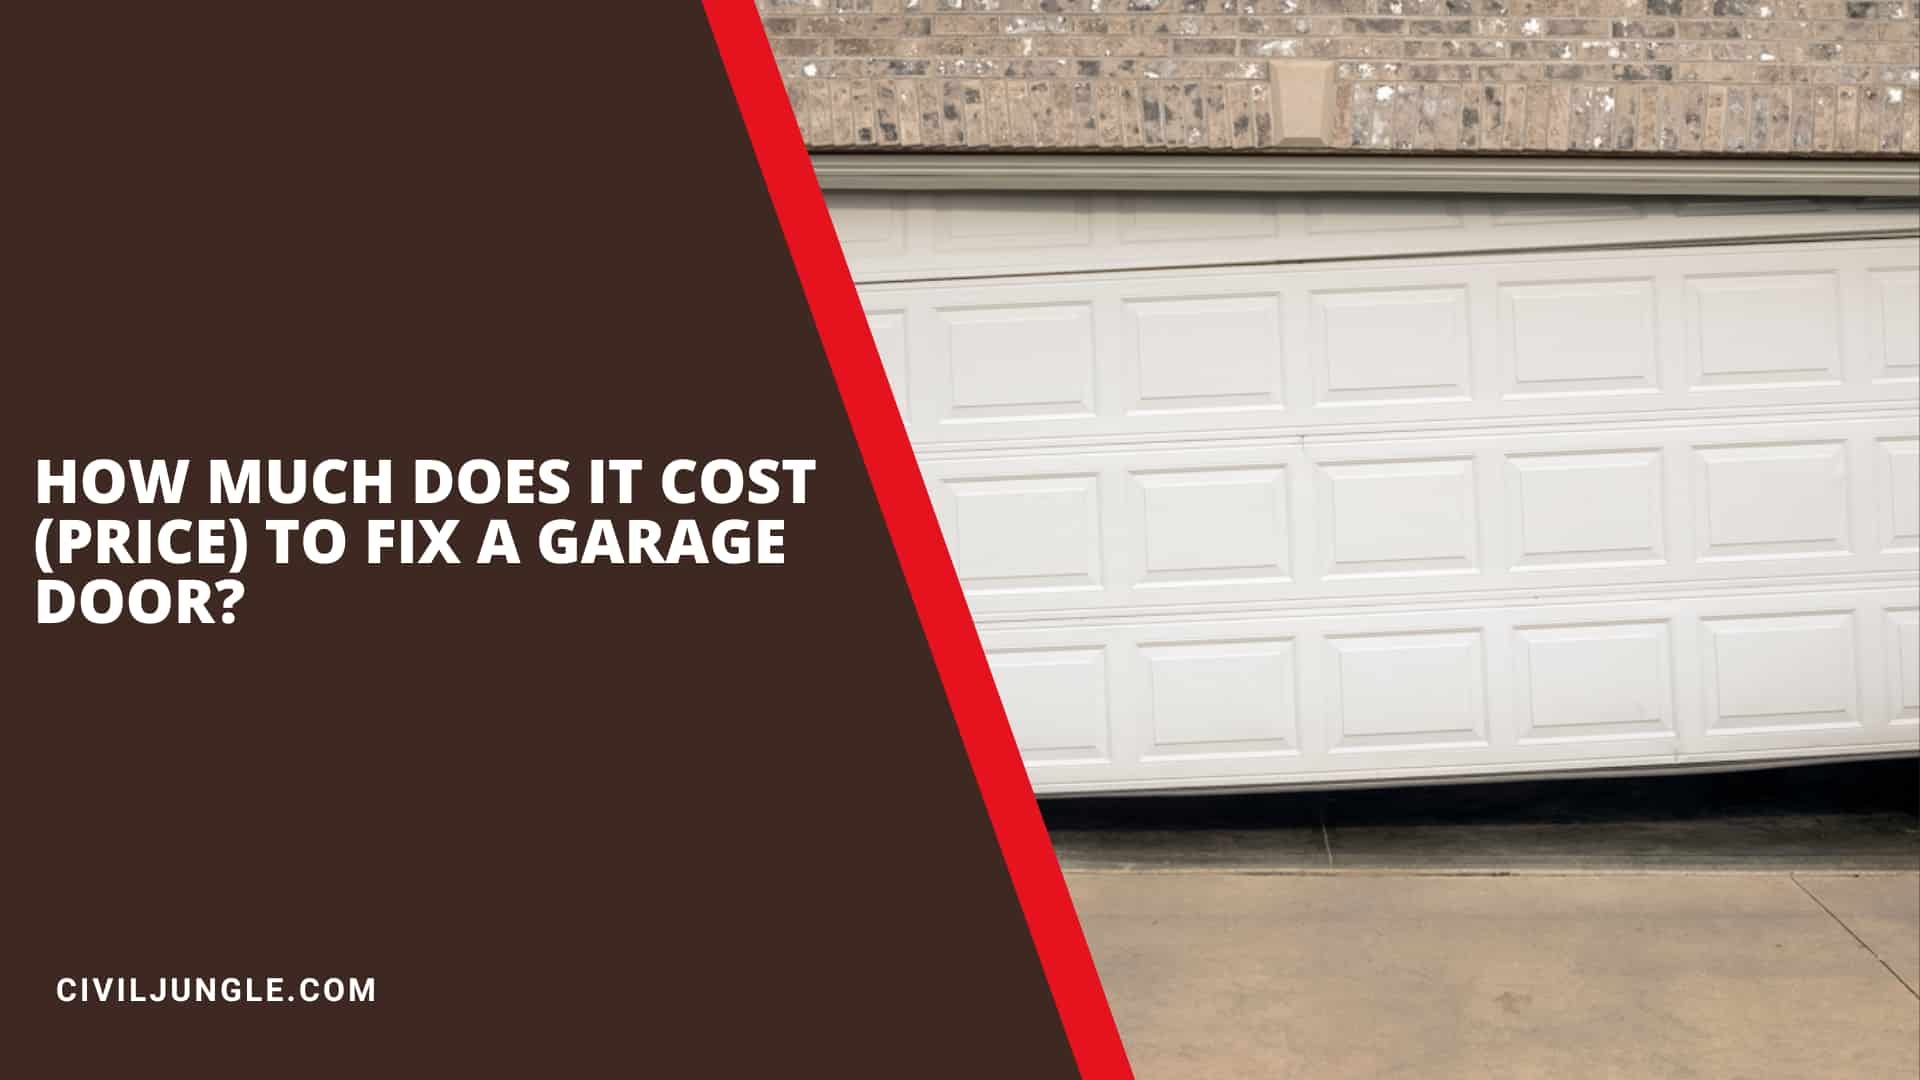 How Much Does It Cost (Price) to Fix a Garage Door?